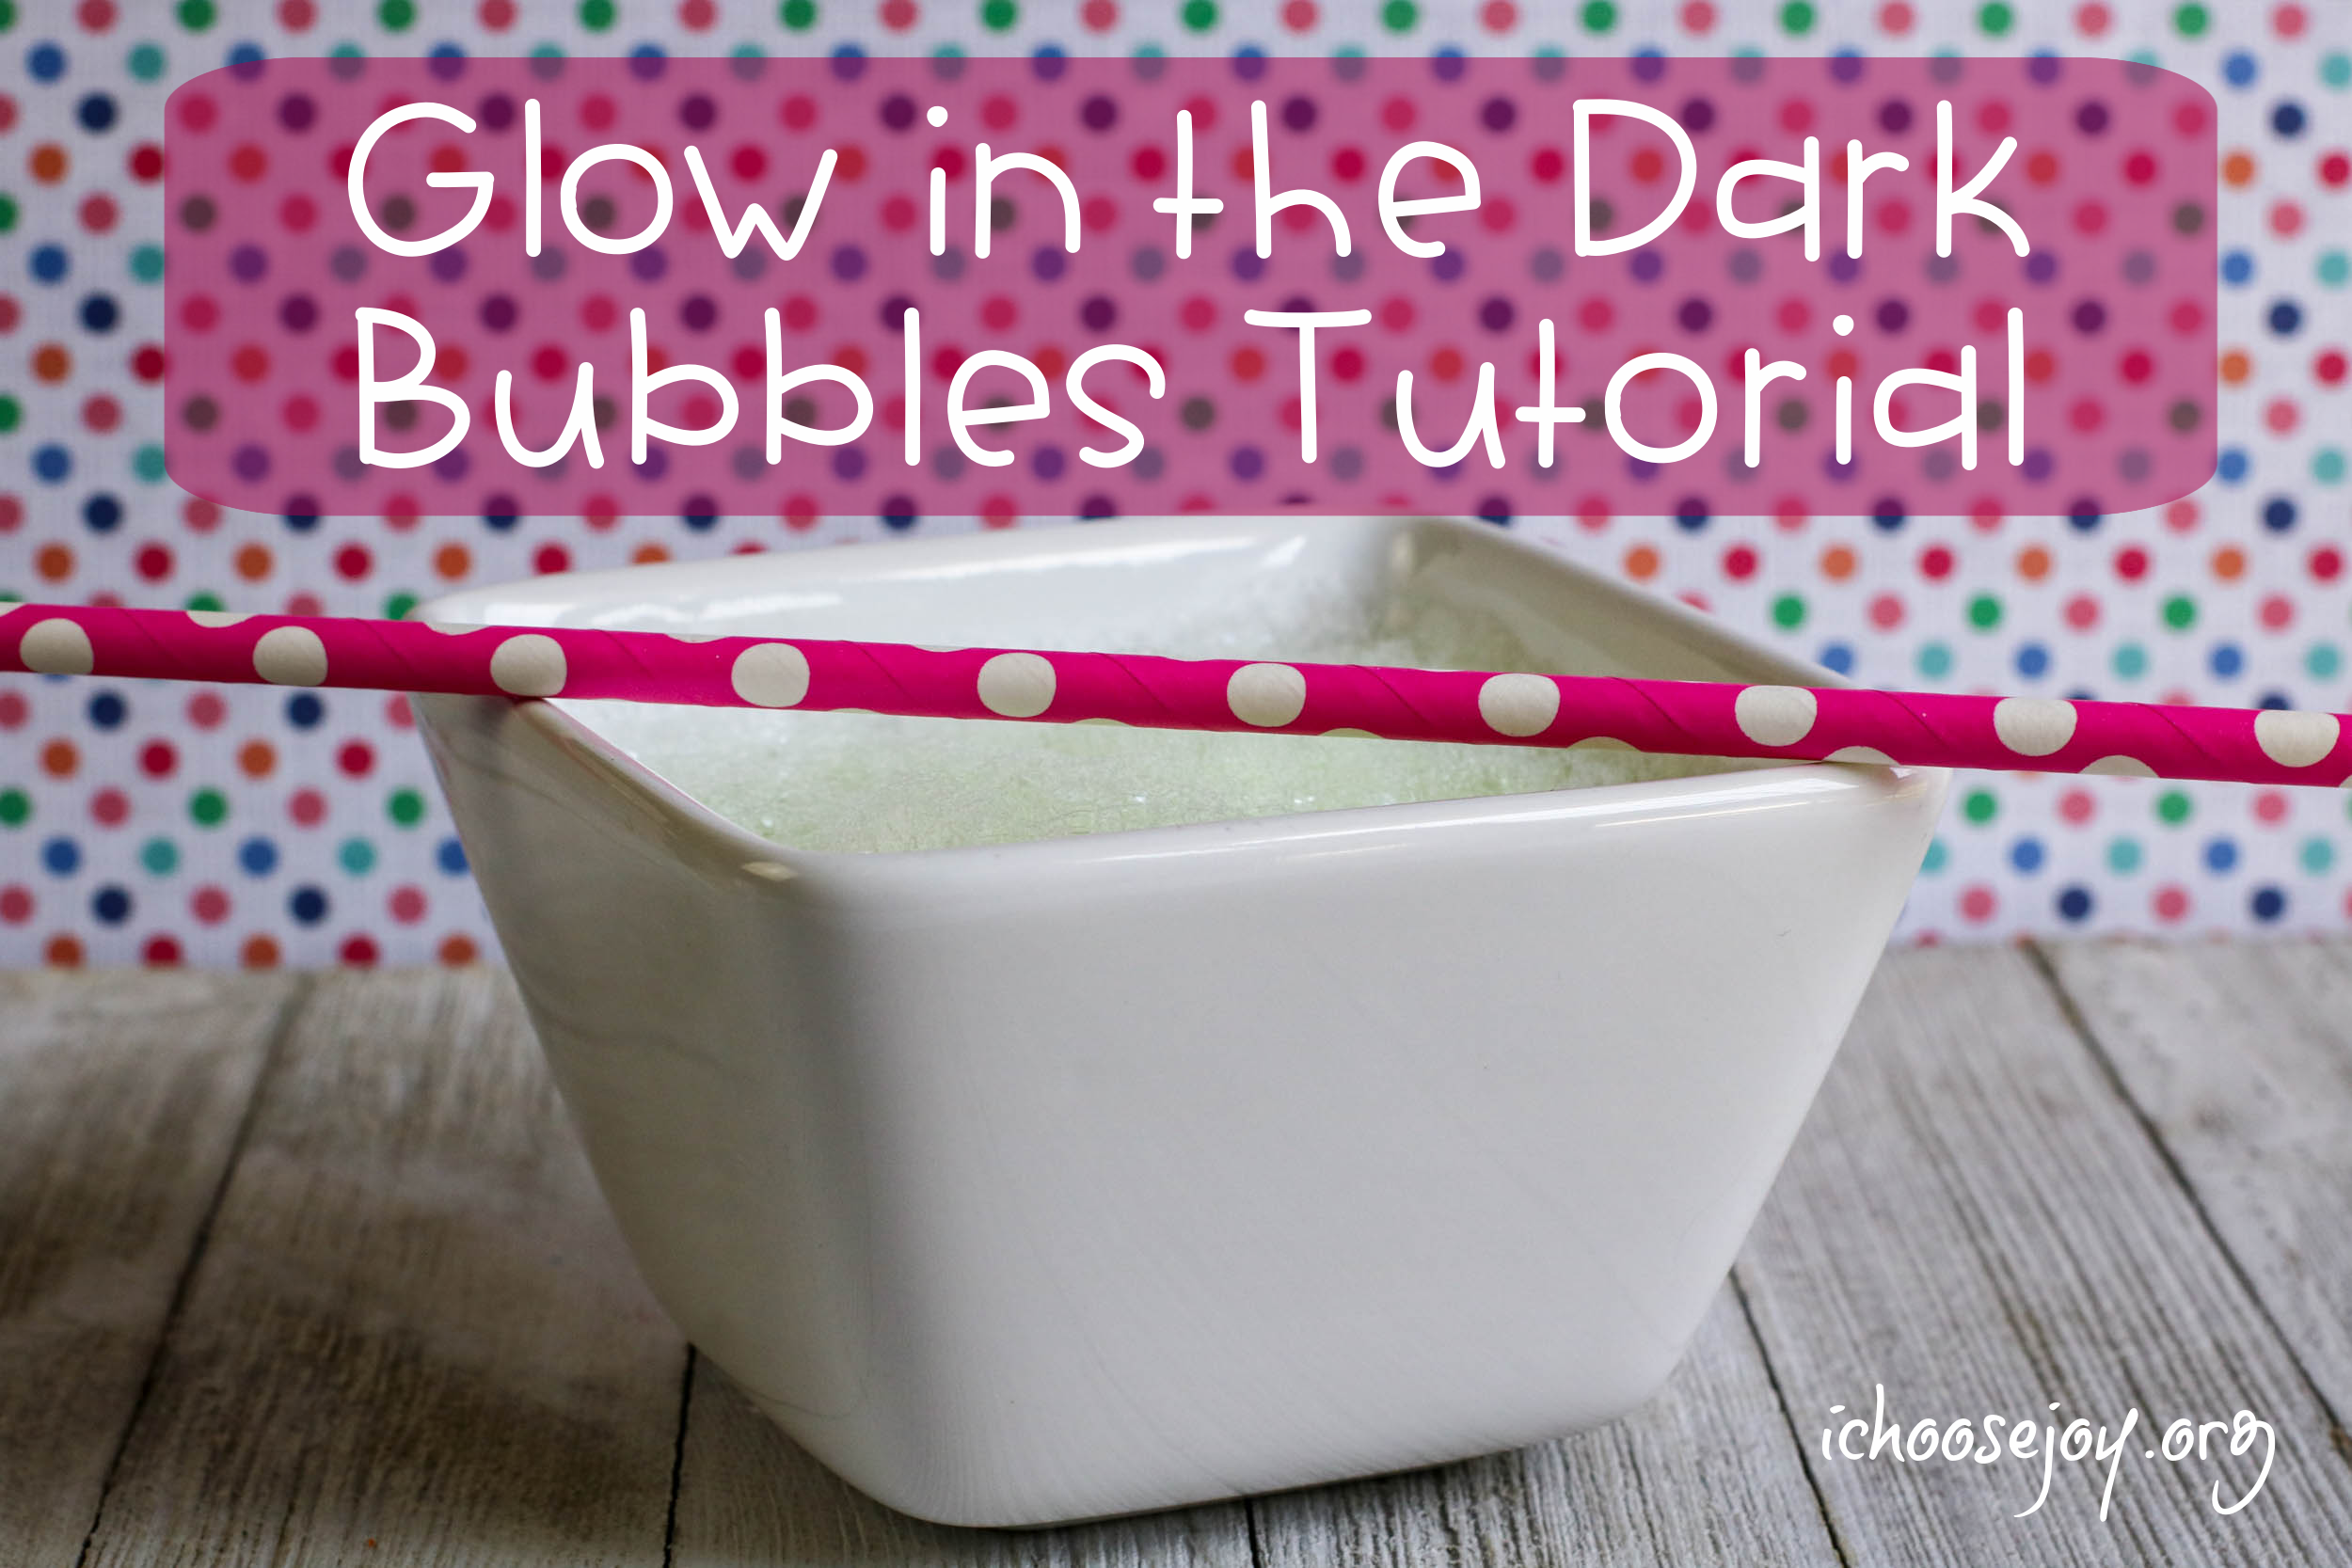 Glow in the Dark Bubbles tutorial: Perfect for New Year’s Eve!